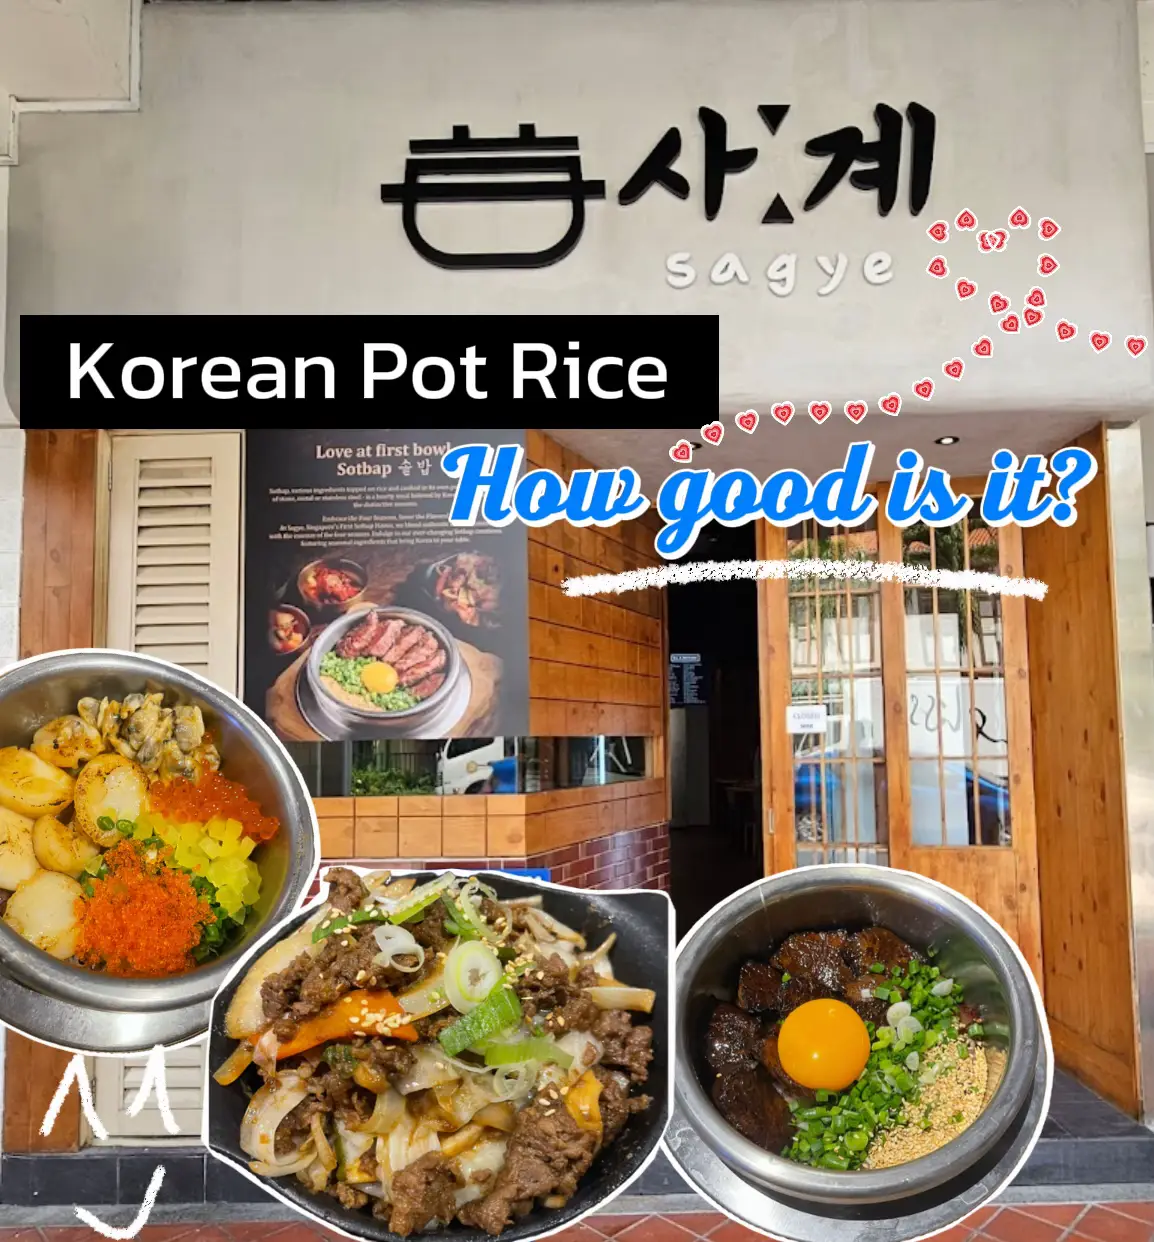 Seafood & Beef Korean Pot rice in SG's images